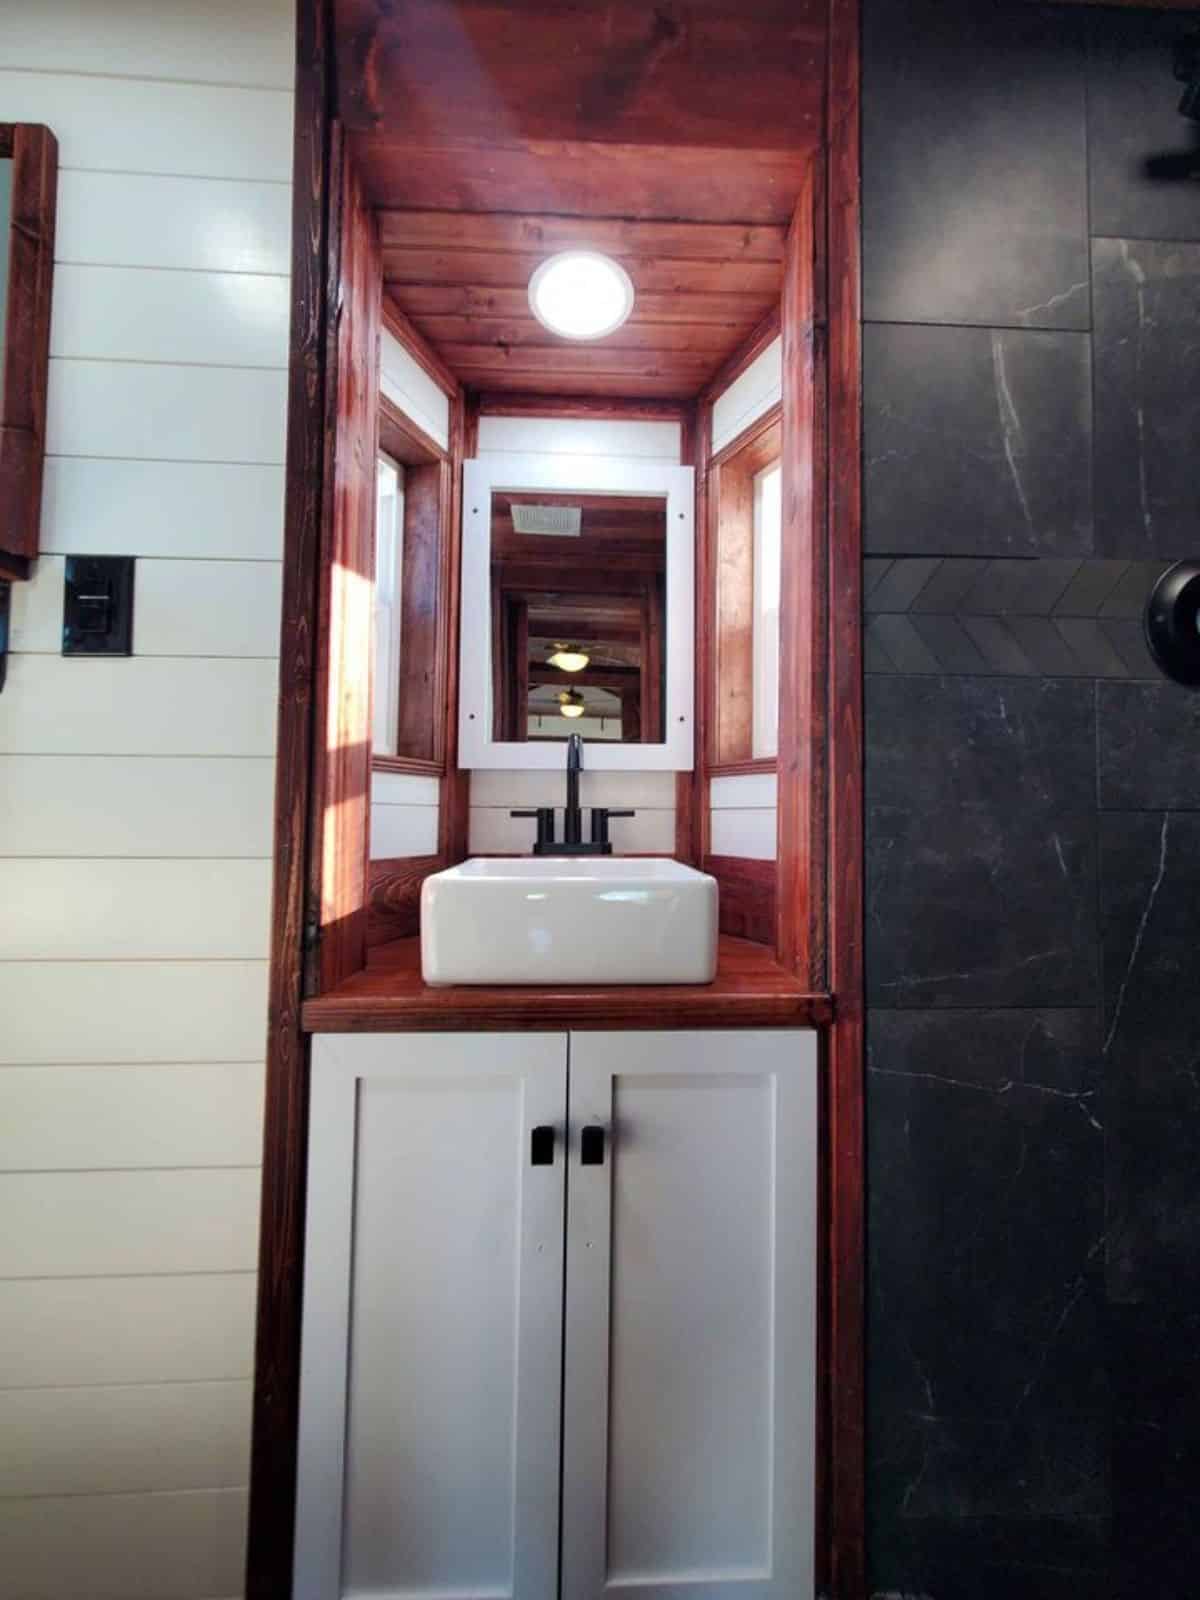 sink with vanity and mirror and standard toilet in bathroom